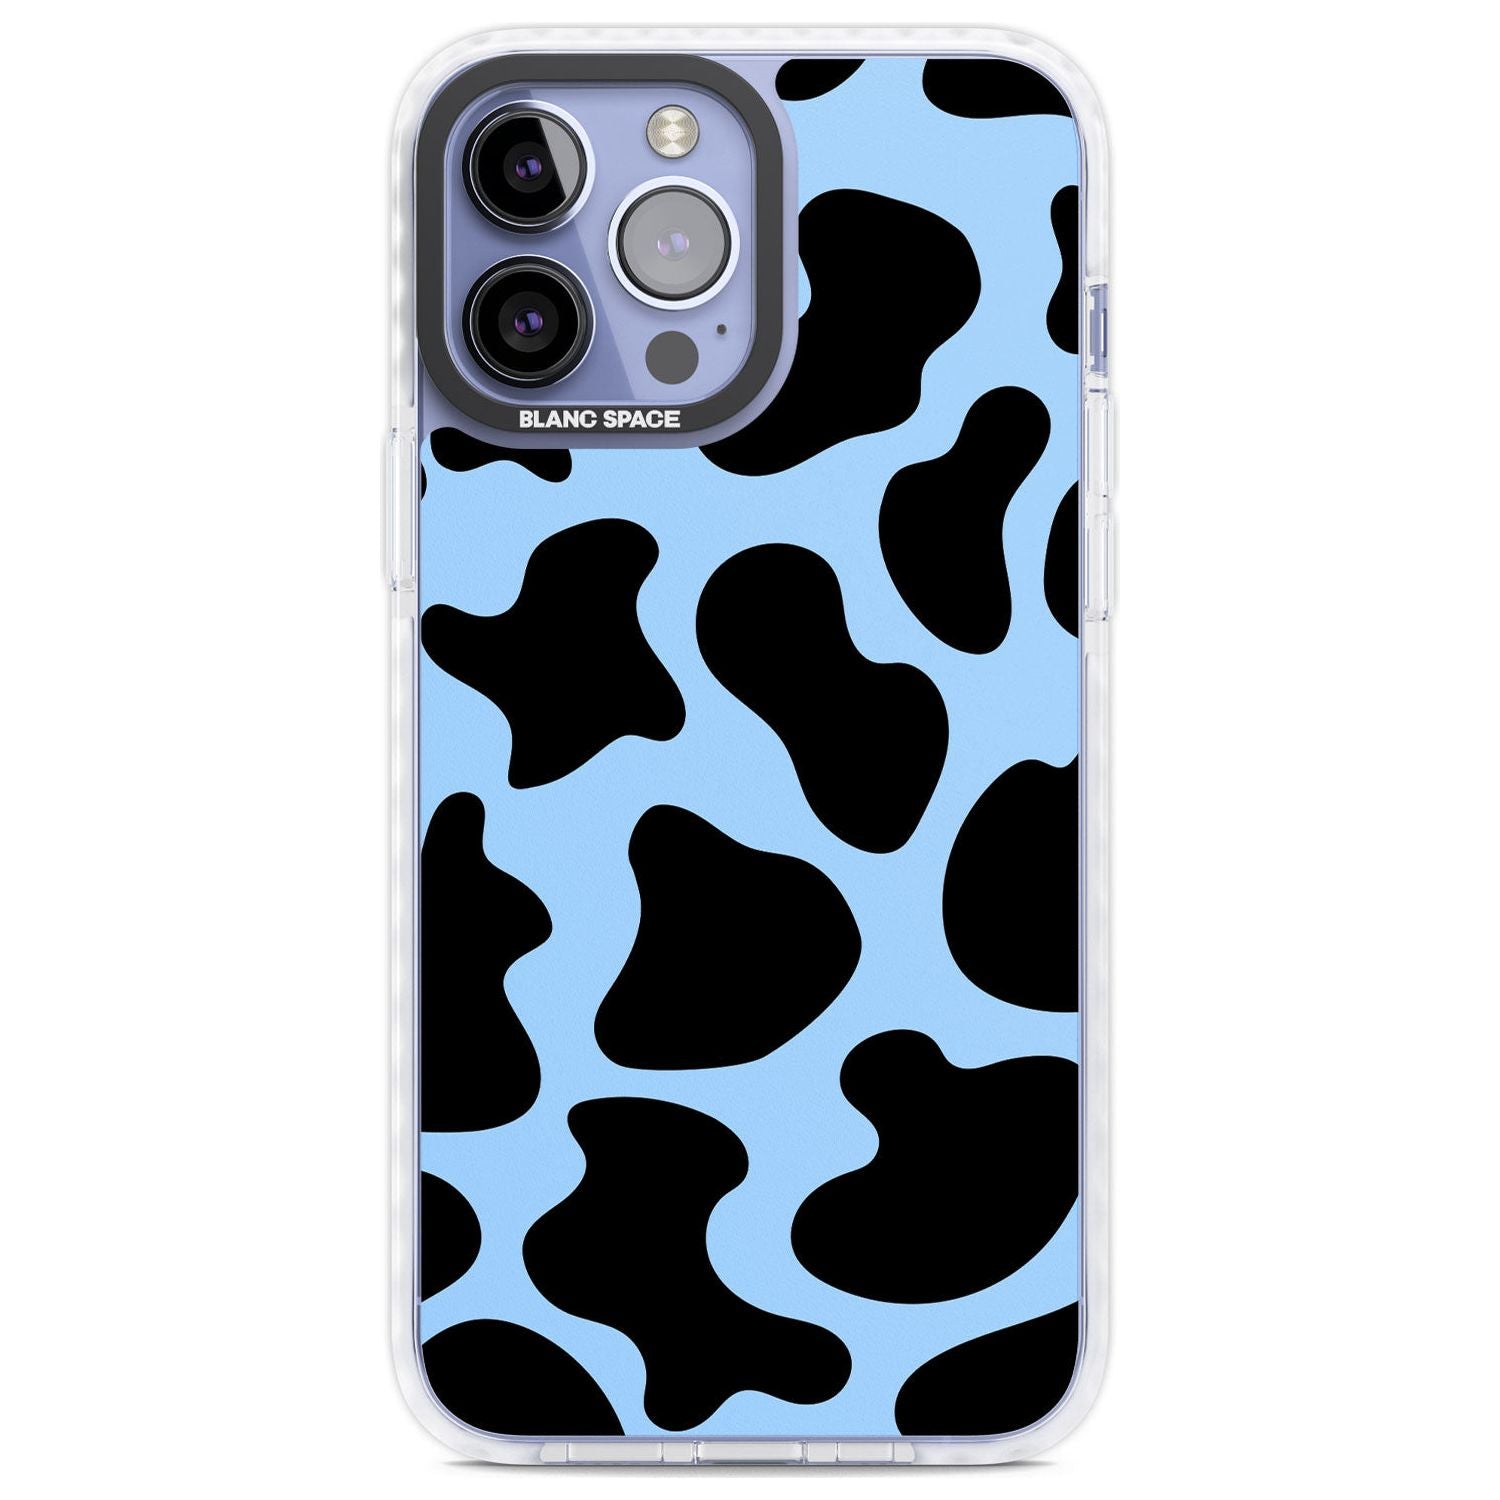 Blue and Black Cow Print Phone Case iPhone 13 Pro Max / Impact Case,iPhone 14 Pro Max / Impact Case Blanc Space